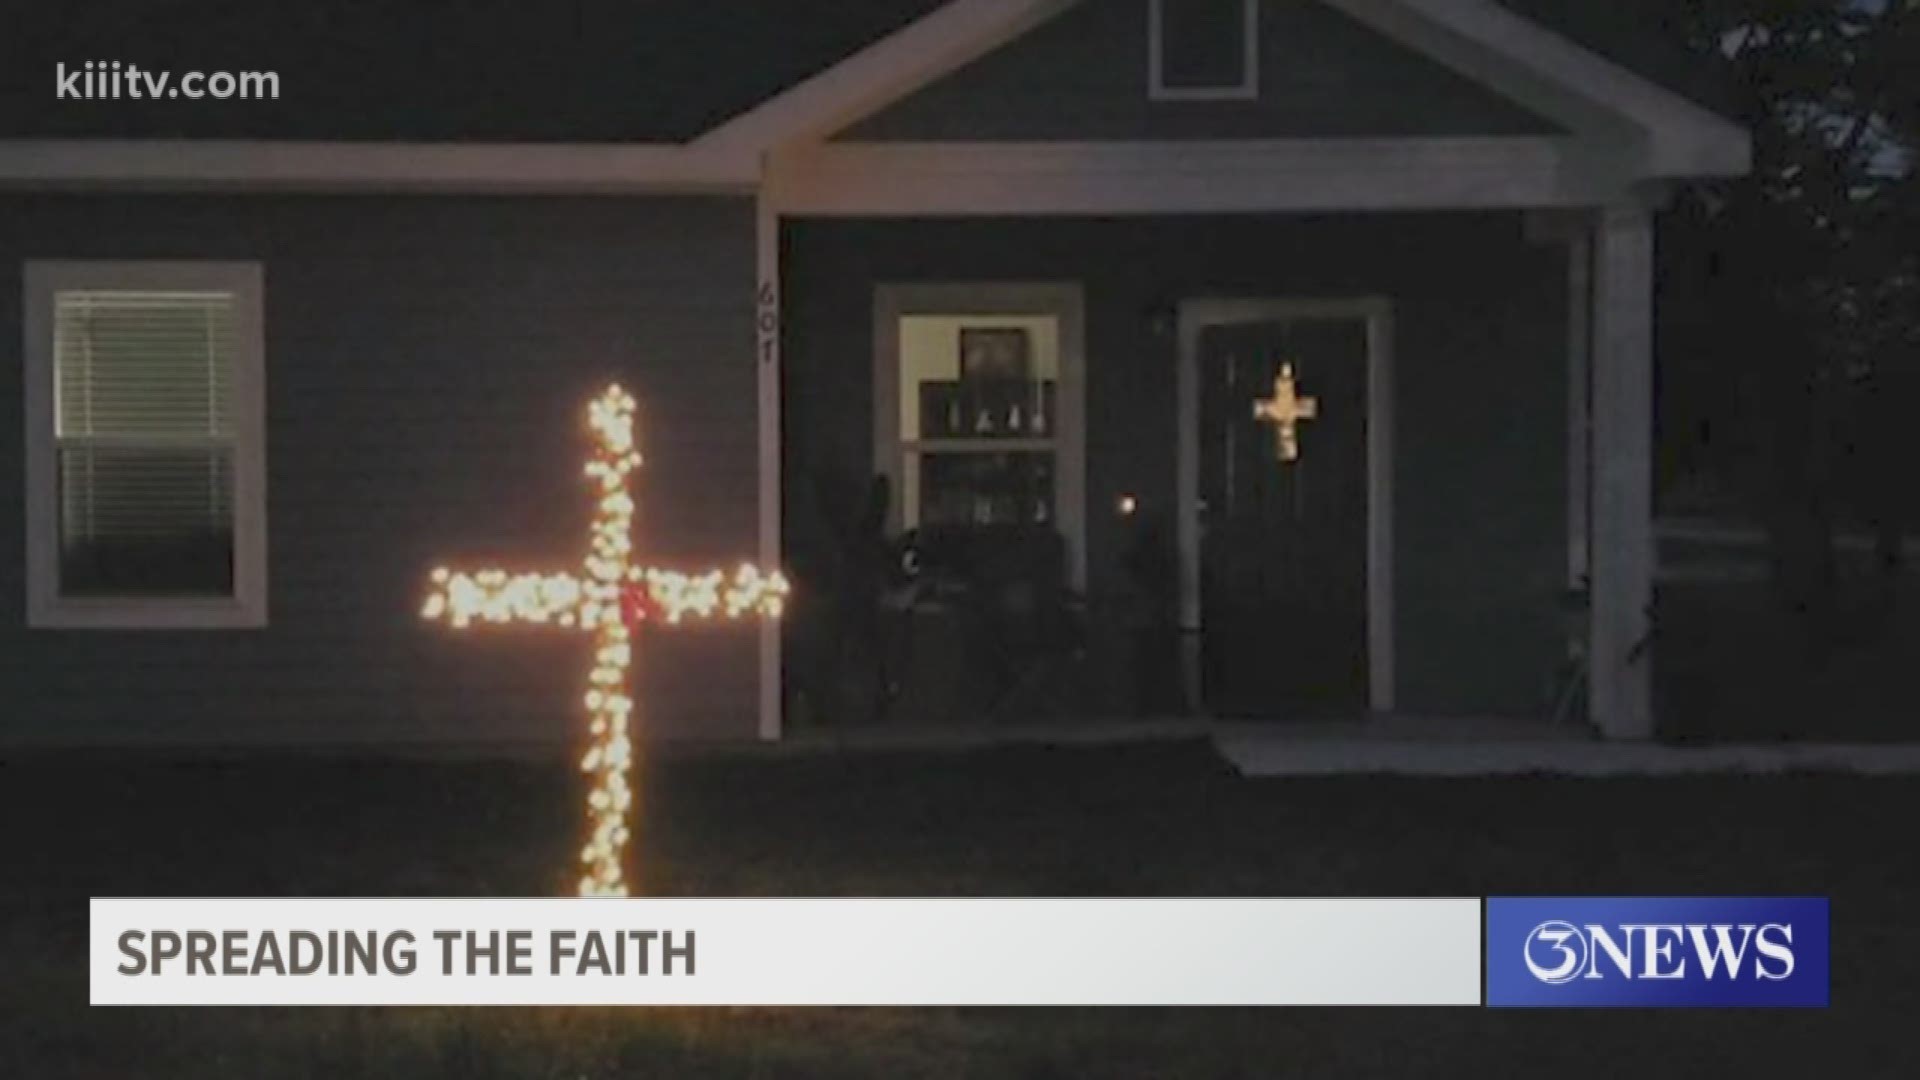 Two families aren't letting the virus stop them from celebrating and spreading a little faith.